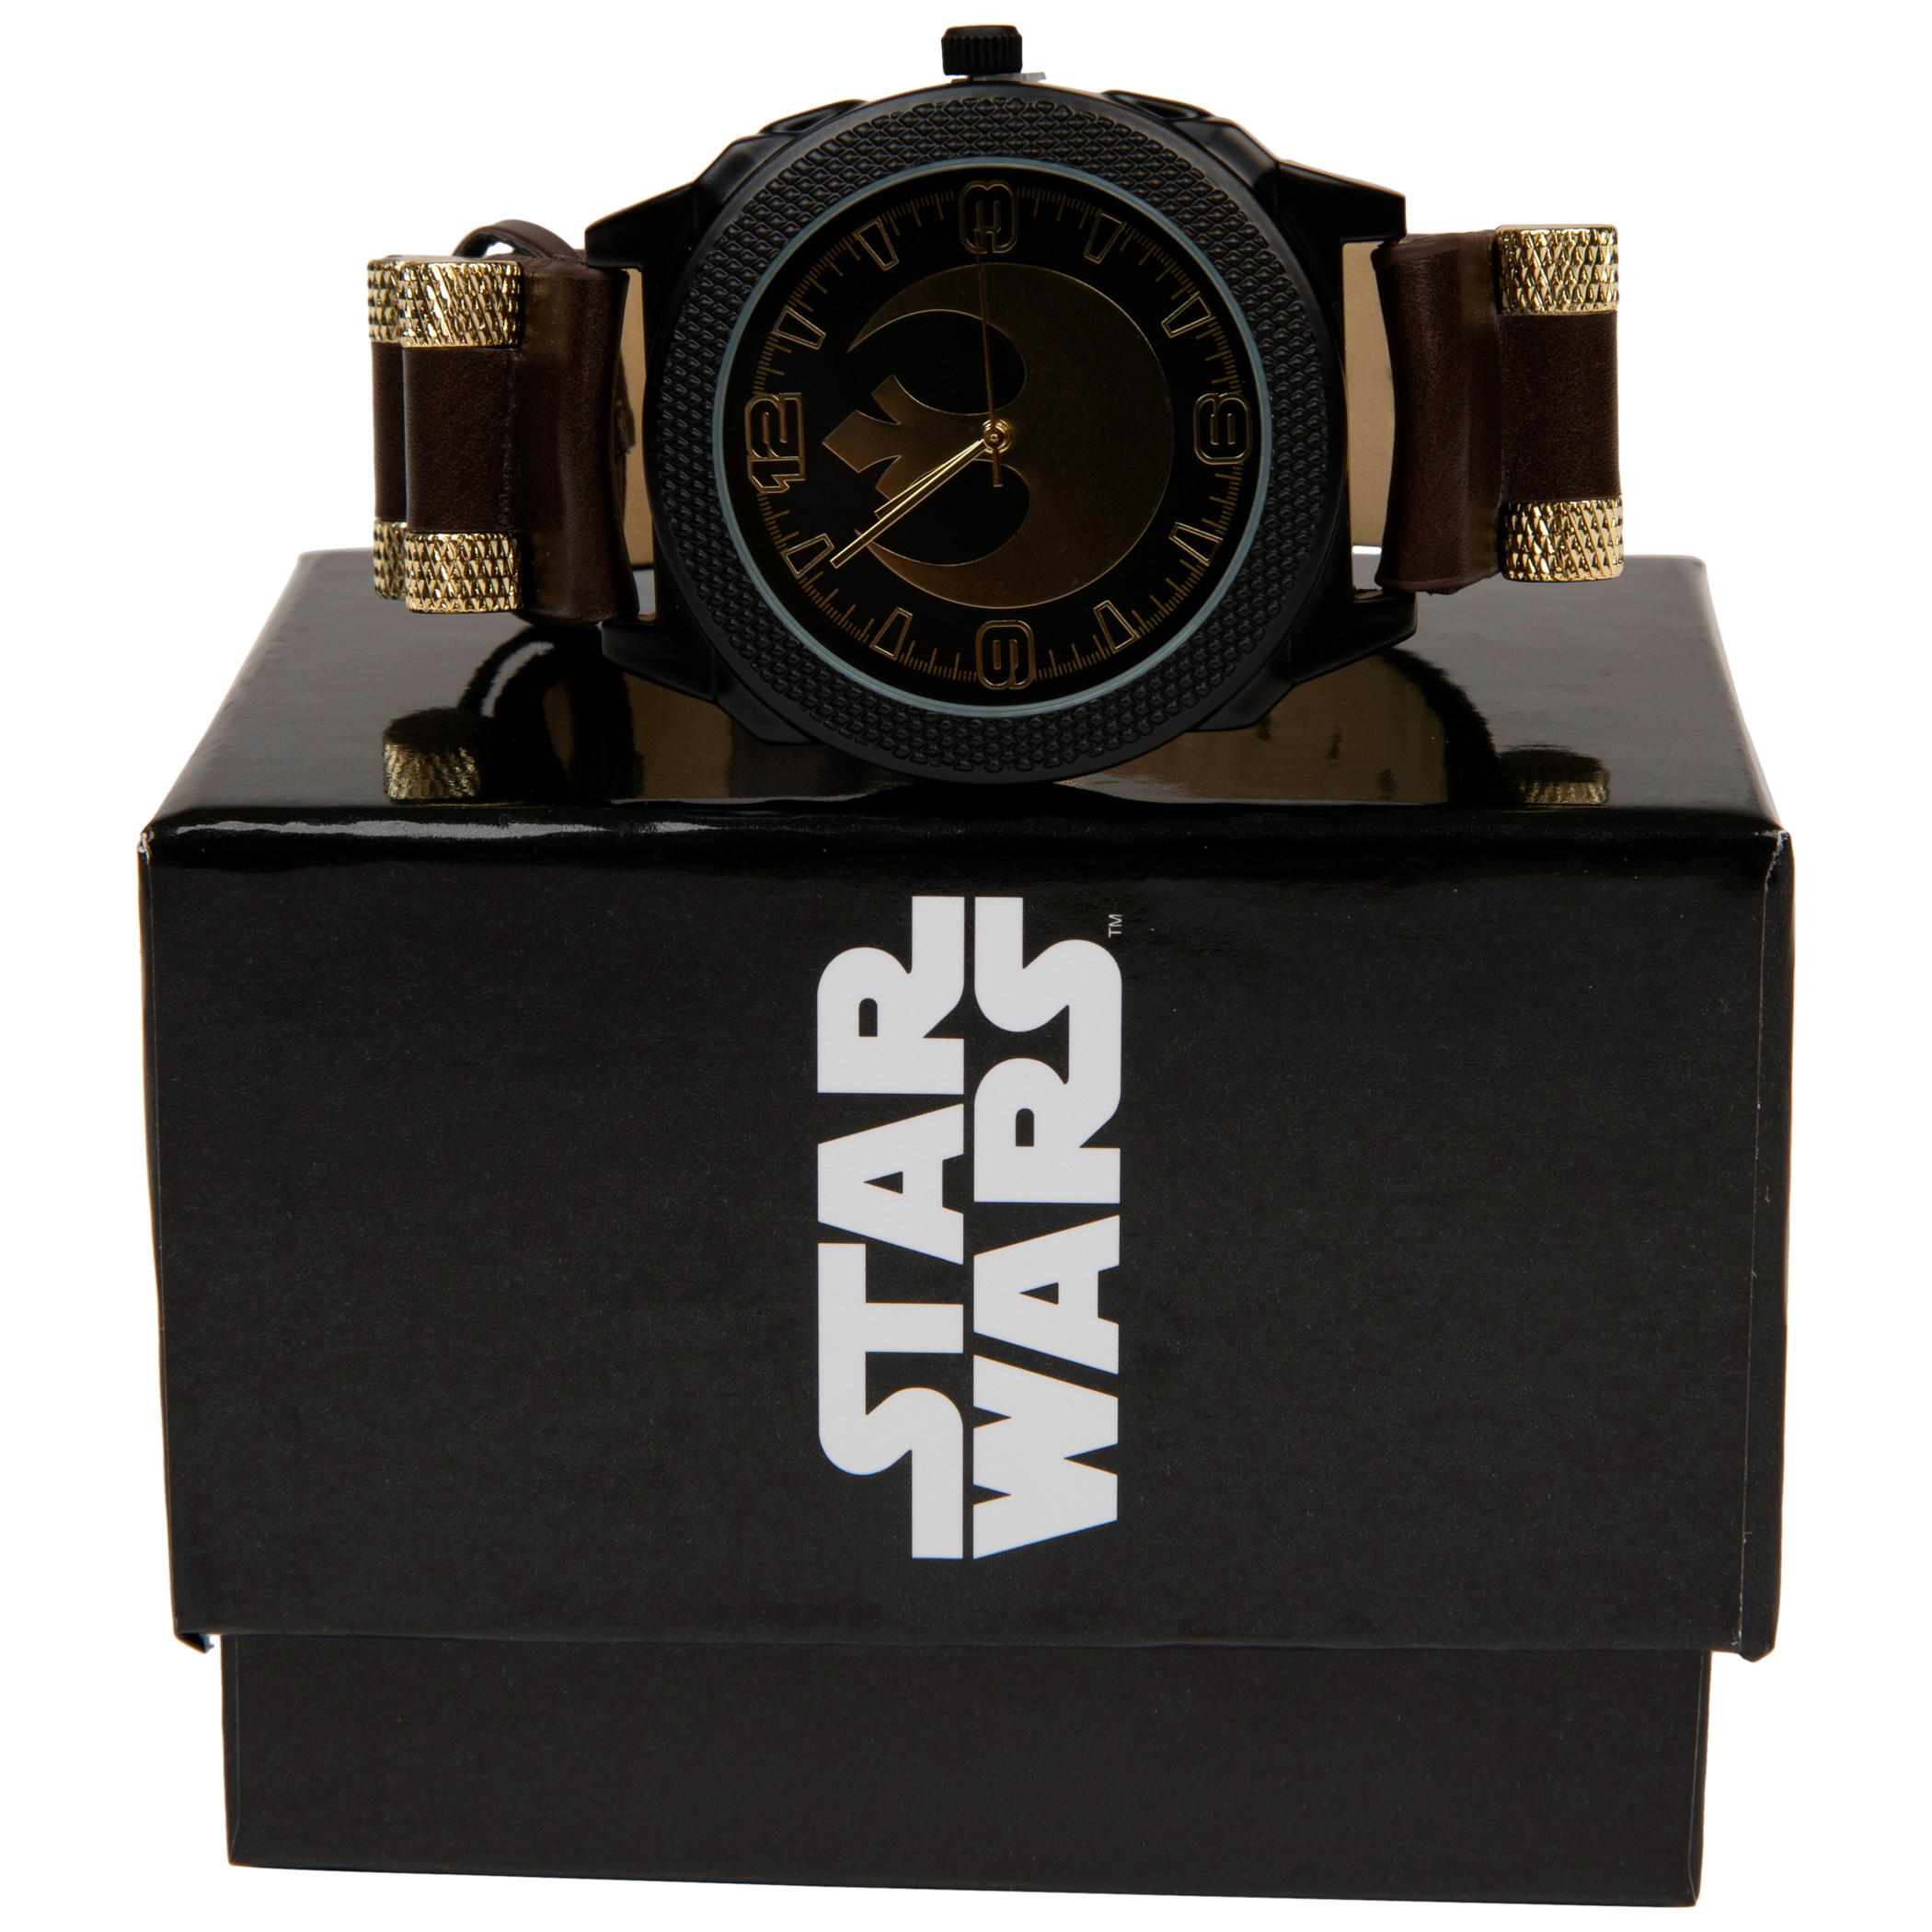 Star Wars Rebel Alliance Symbol Watch with Silicone Band